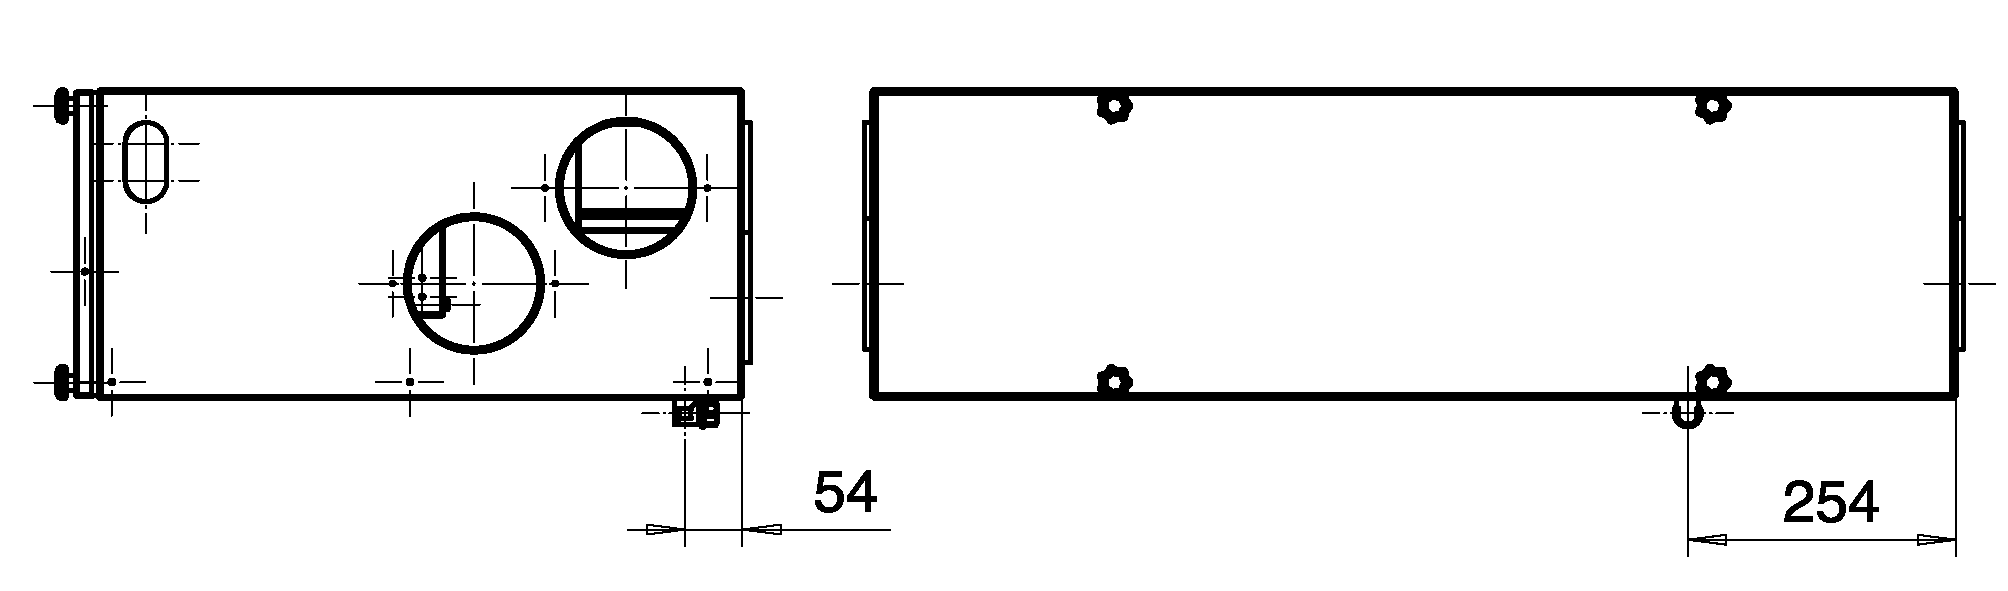 Condensing water outlet dimensioning